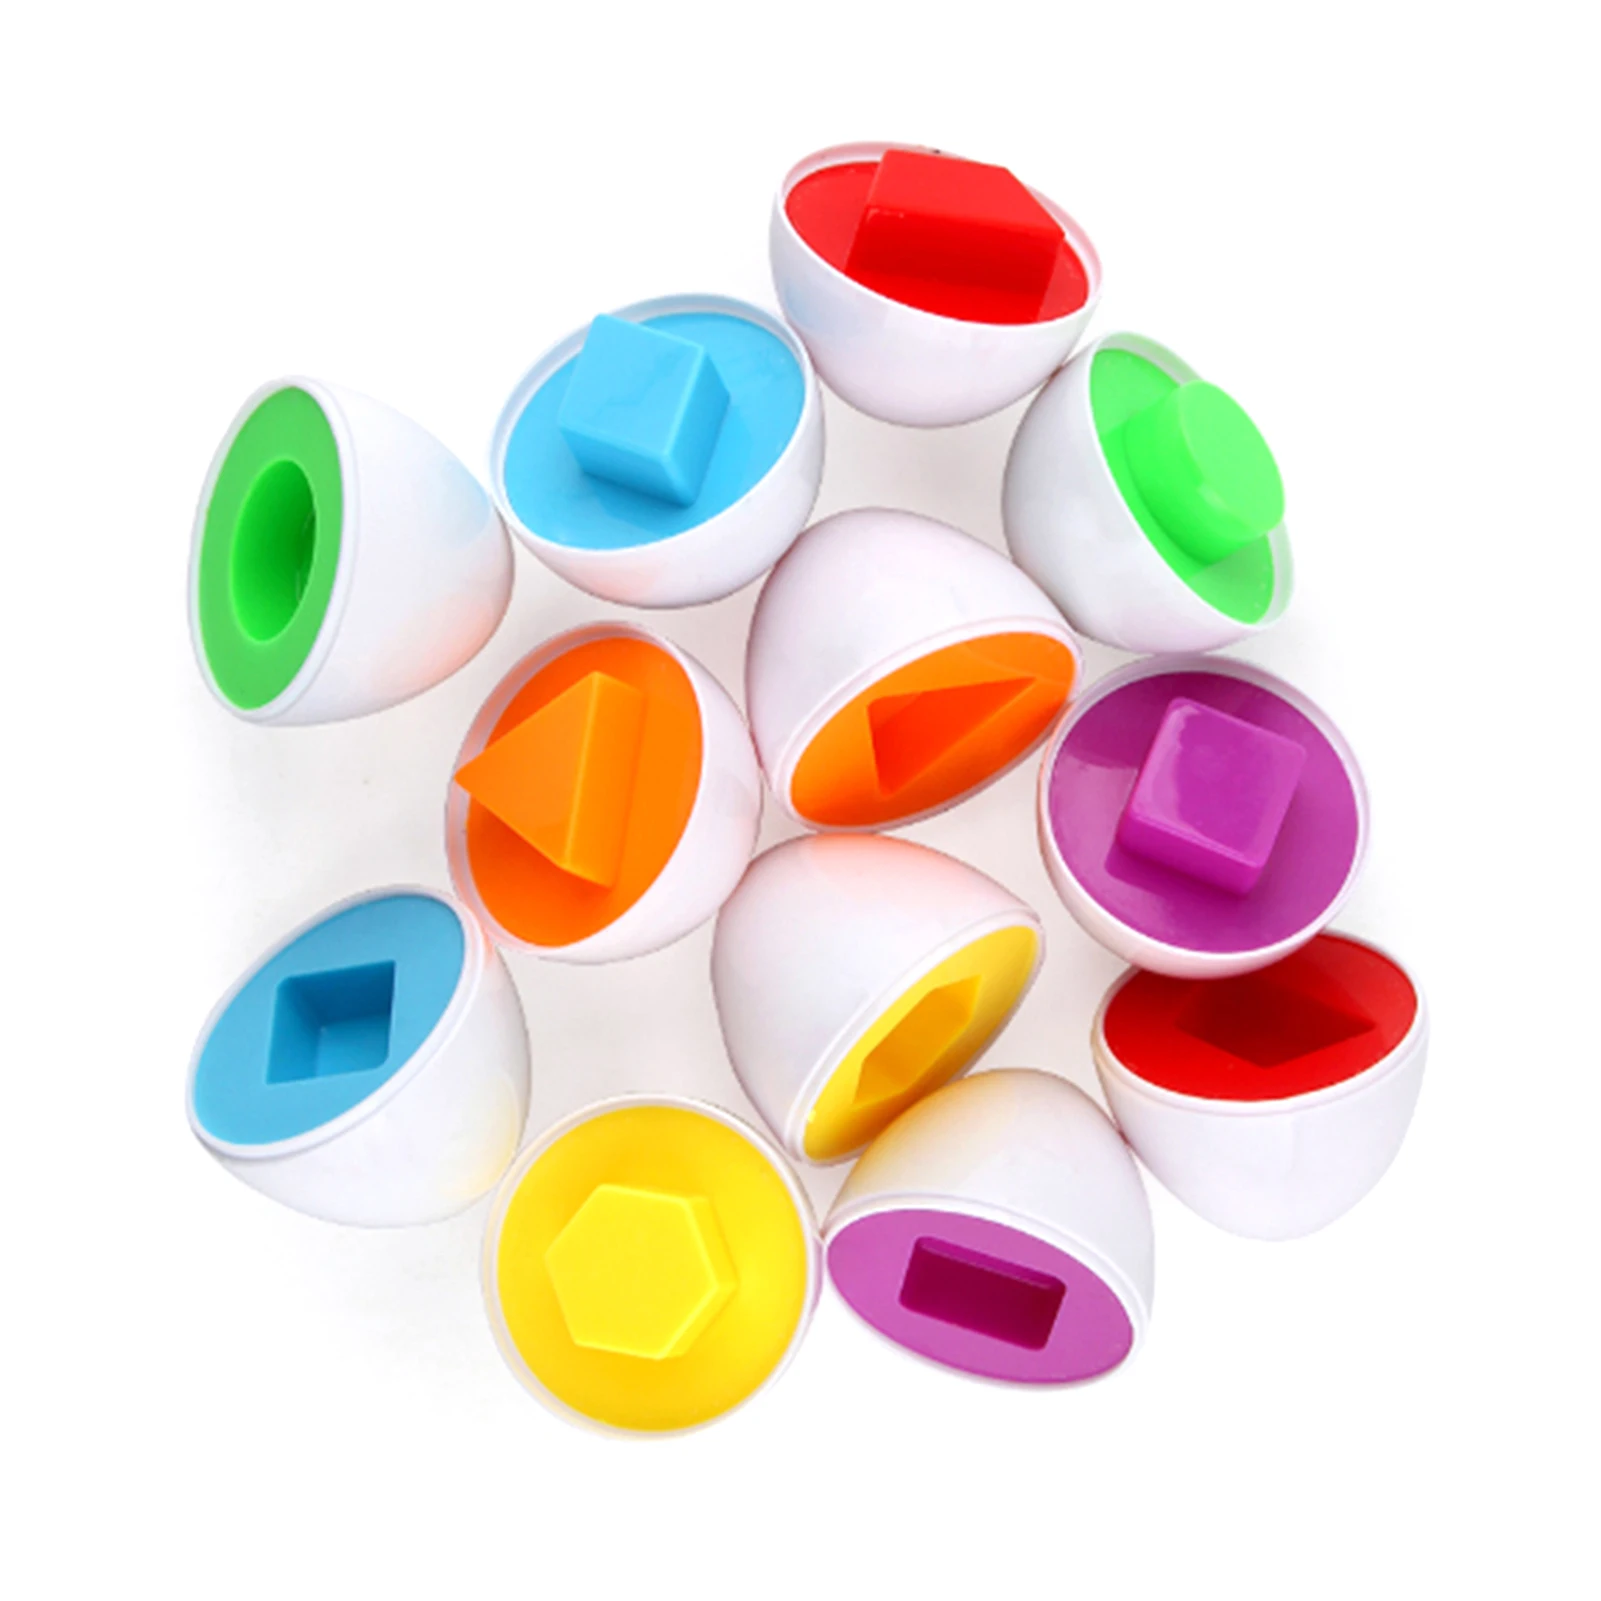 

6pcs Montessori Learning Math Toys Smart Eggs 3D Puzzle Game For Children Math Toys Mixed Shape STEM Popular Sorting Toys